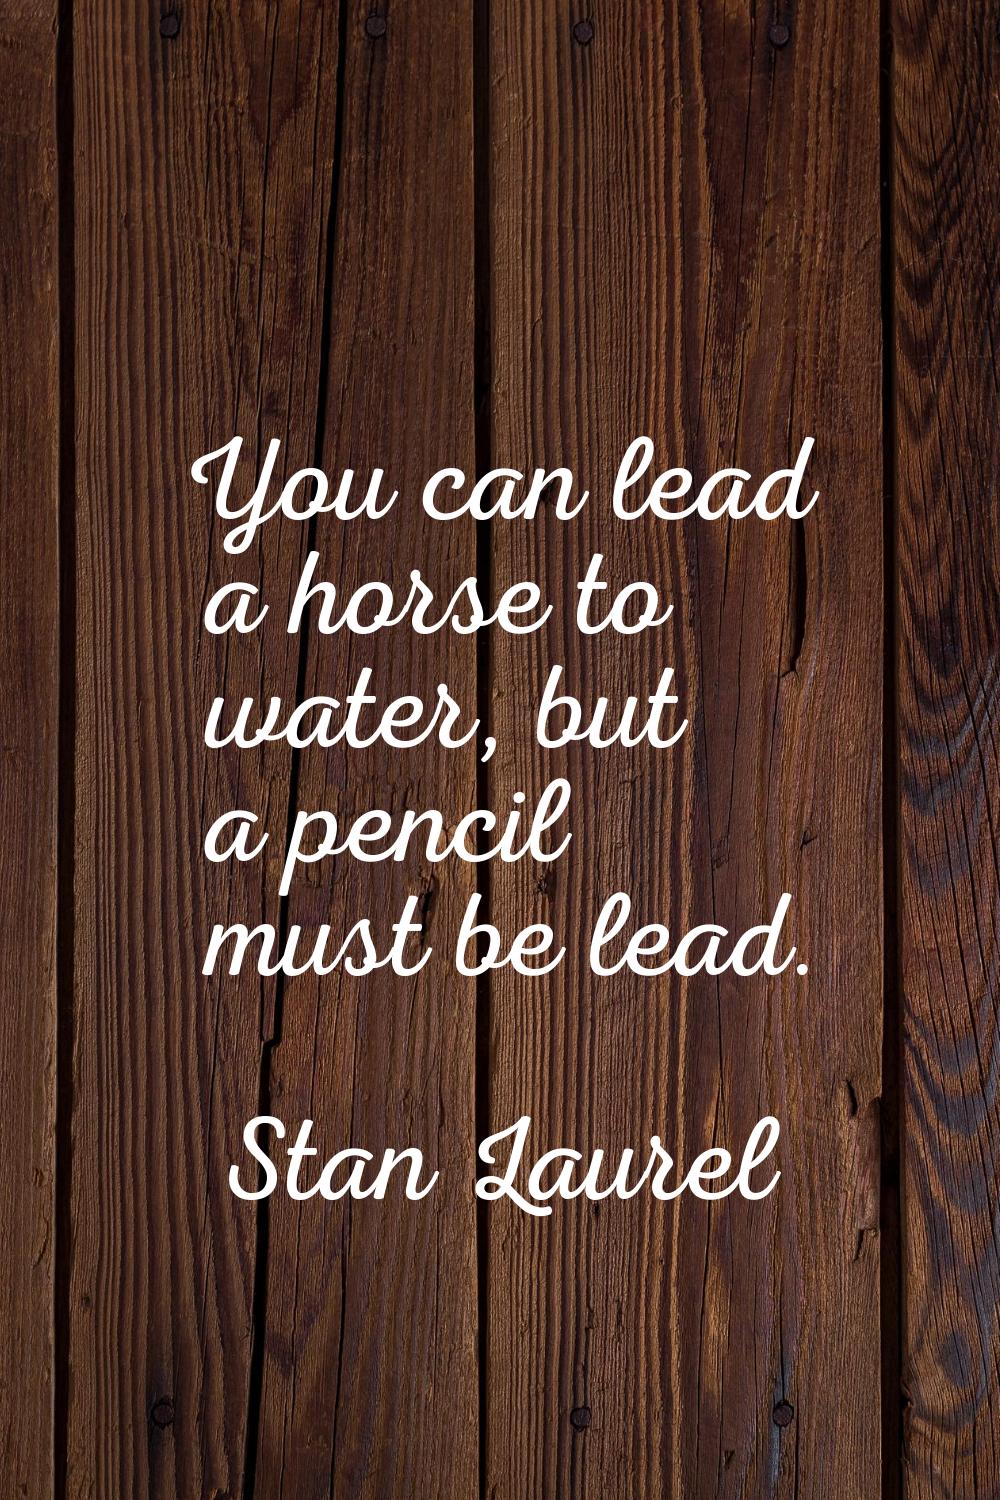 You can lead a horse to water, but a pencil must be lead.